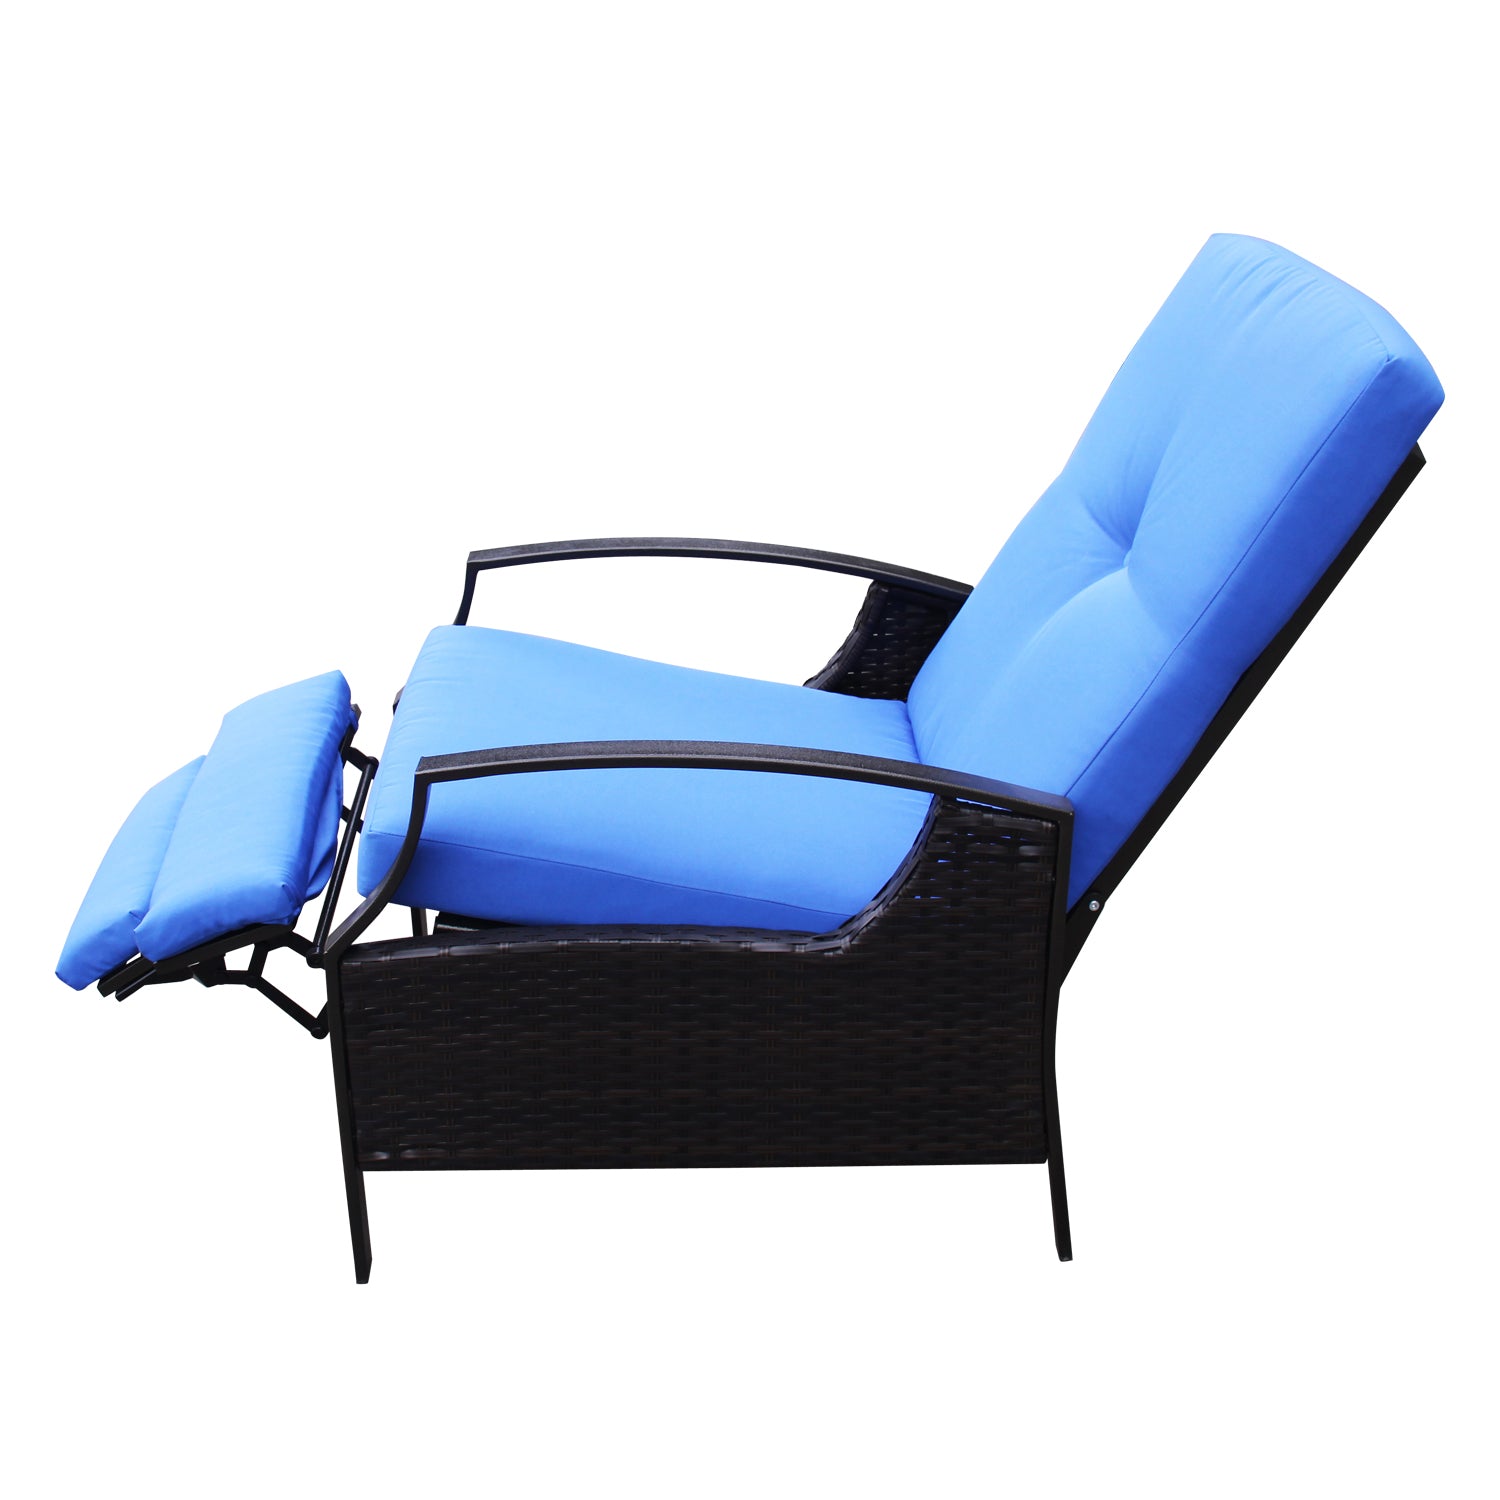 Rattan Adjustable Recliner Chair with Hand-Woven All-Weather Wicker for Patio Garden, Poolside,